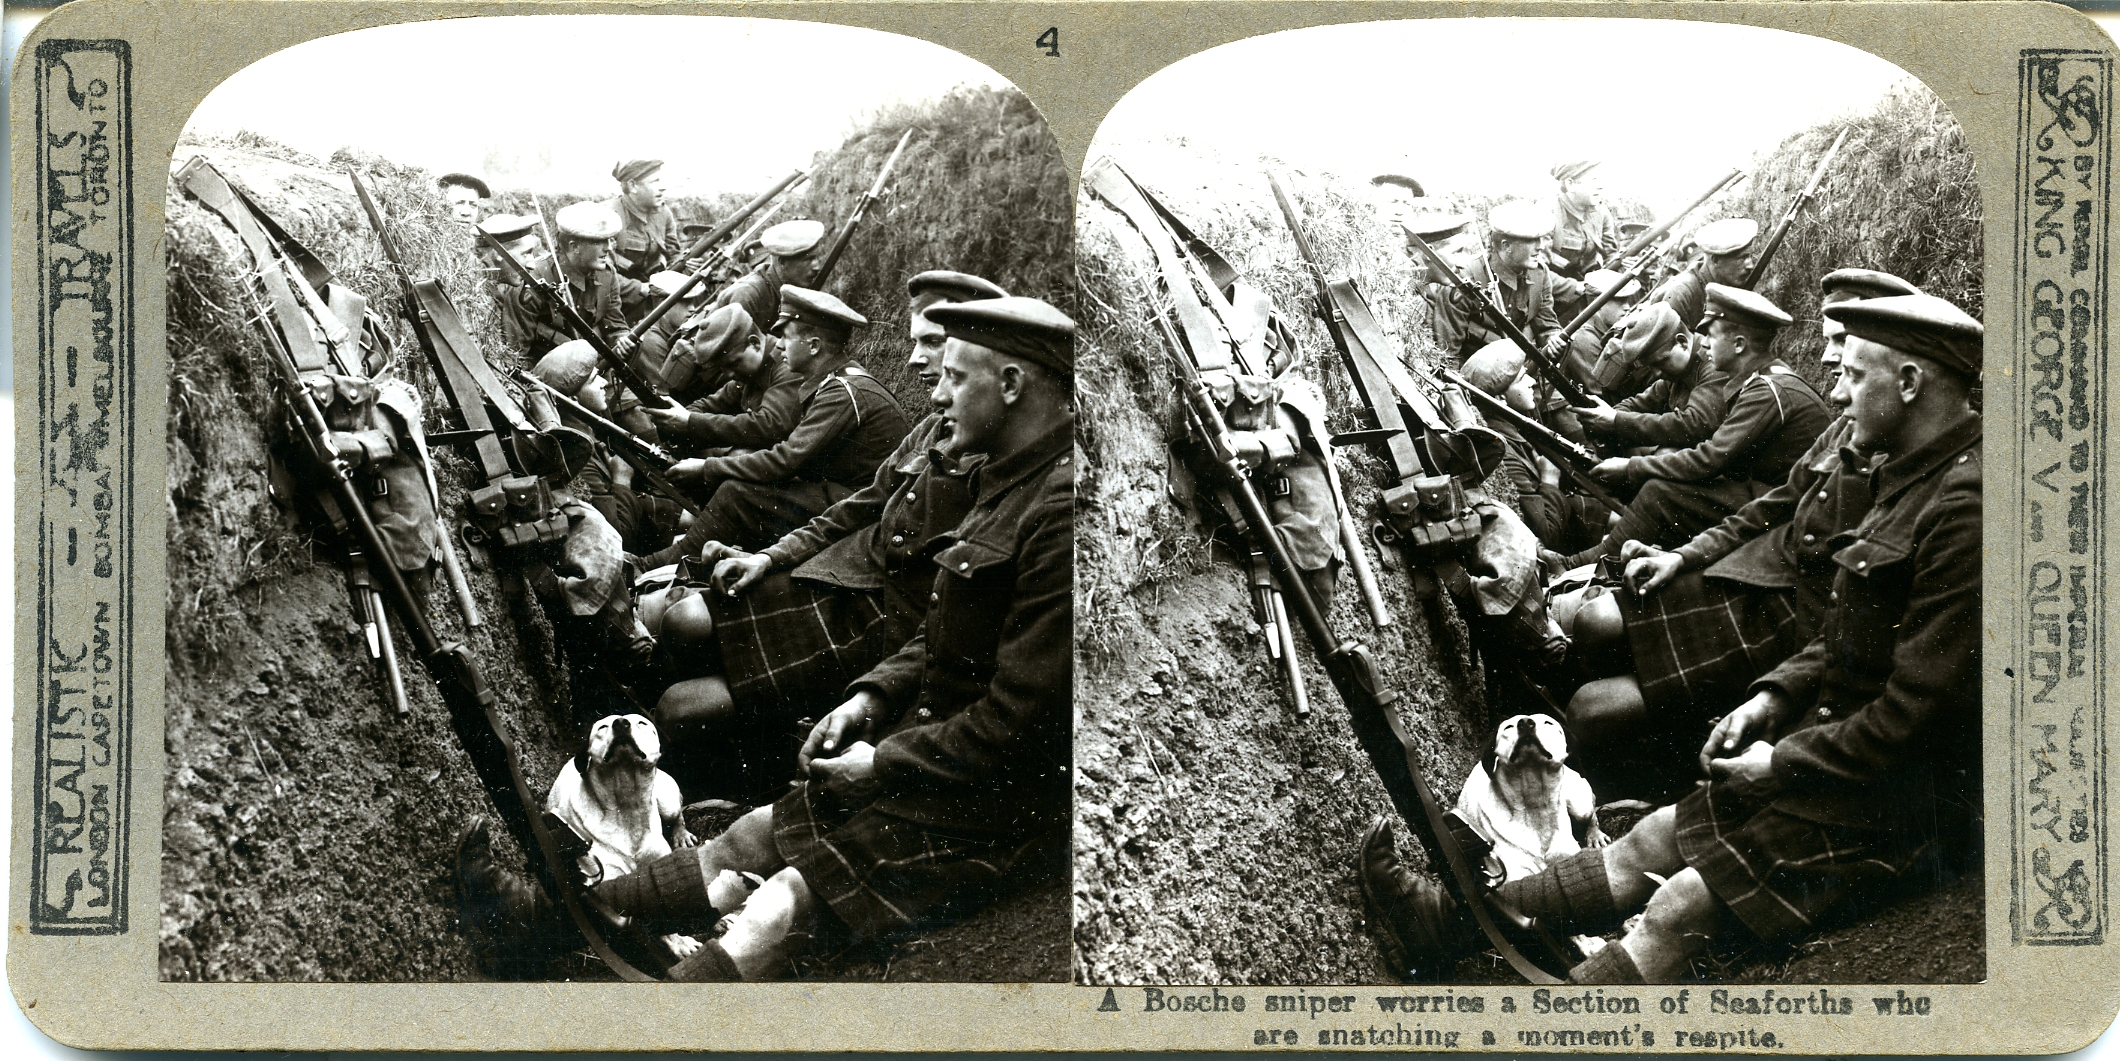 A Bosche sniper worries the Seaforths, who are snatching an hour's respite with their mascot